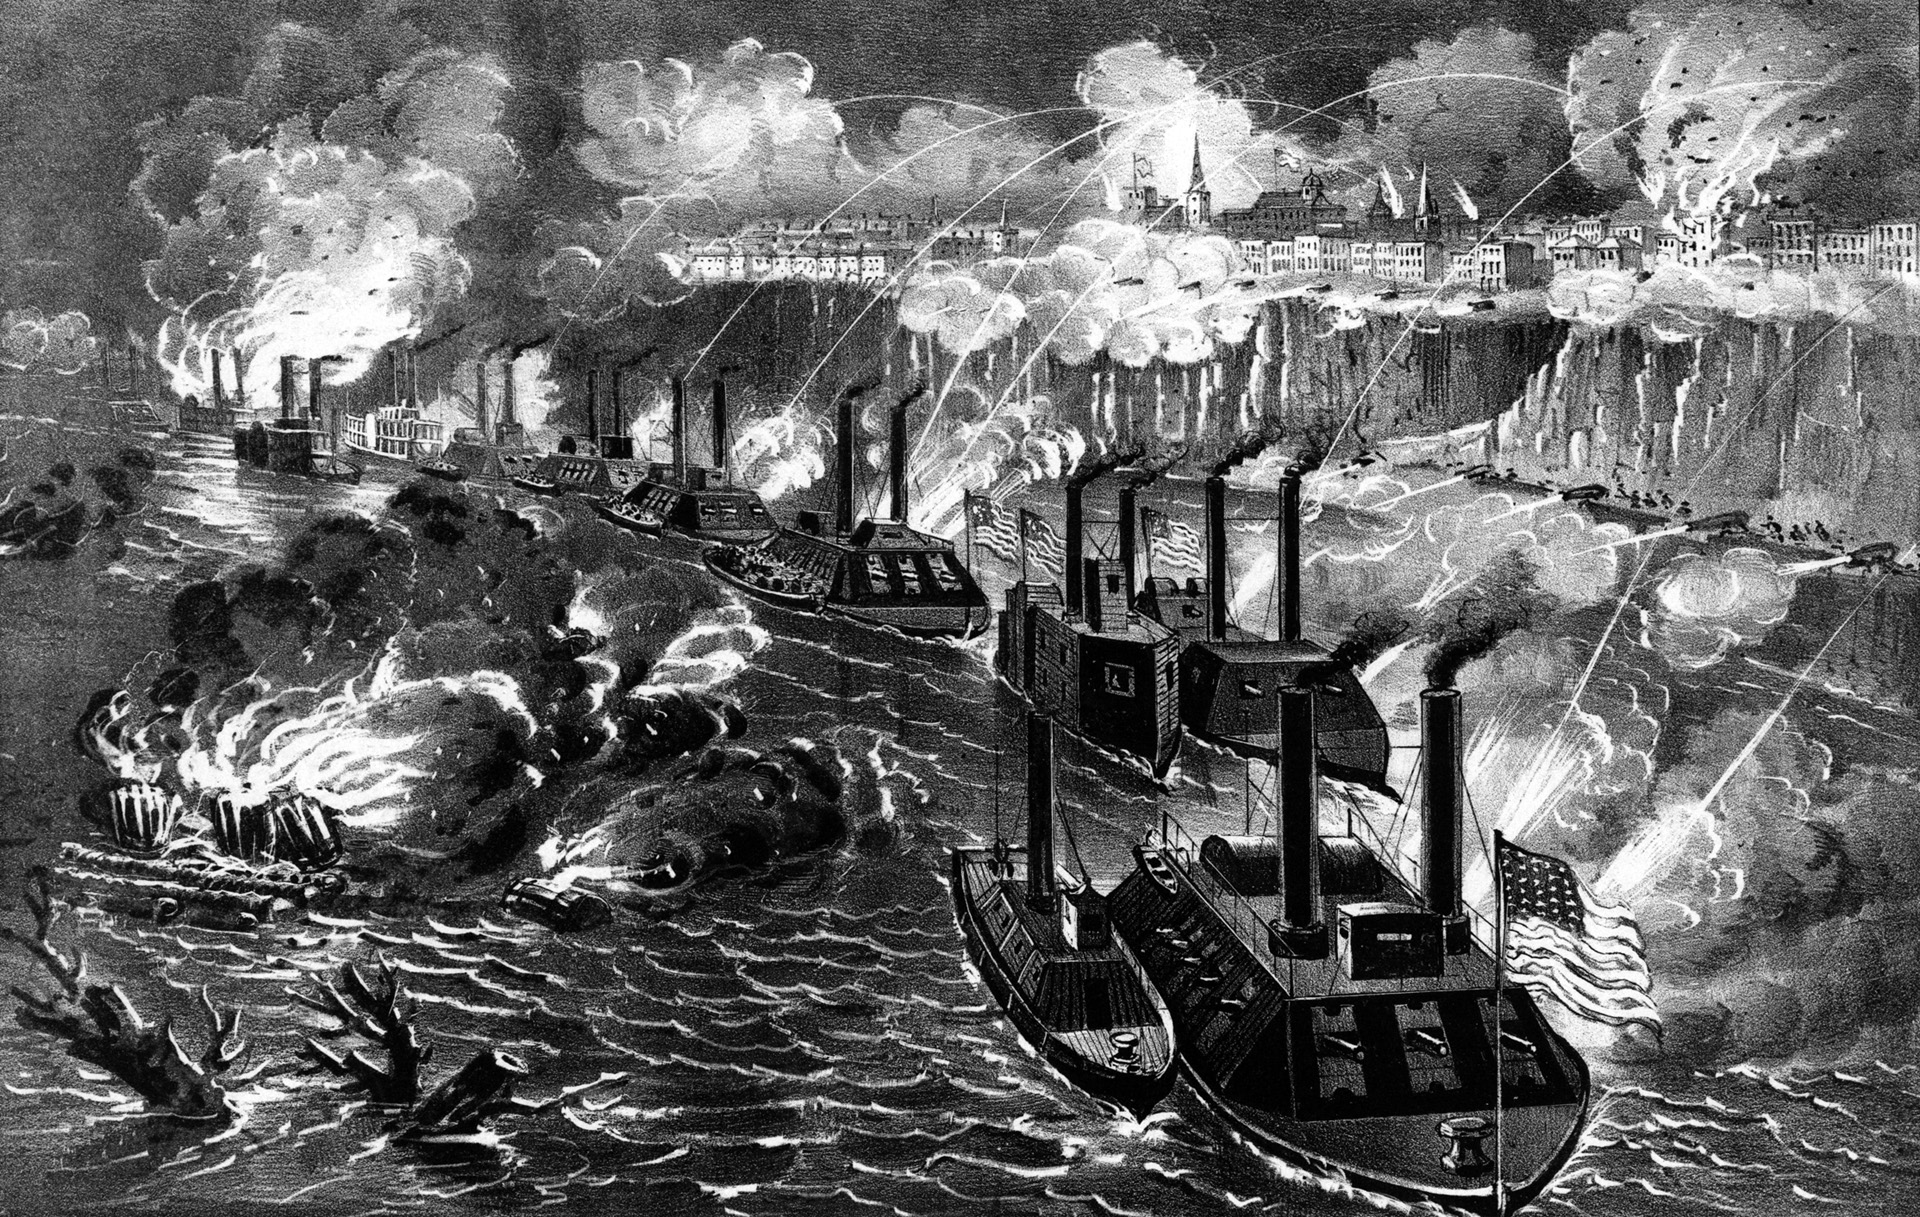 Rear Admiral David D. Porter’s gunboats run past the Vicksburg batteries on April 16, 1863, in a Currier and Ives print. Lashed to the gunboats are transports and barges that would be used to ferry Union soldiers across the Mississippi River.